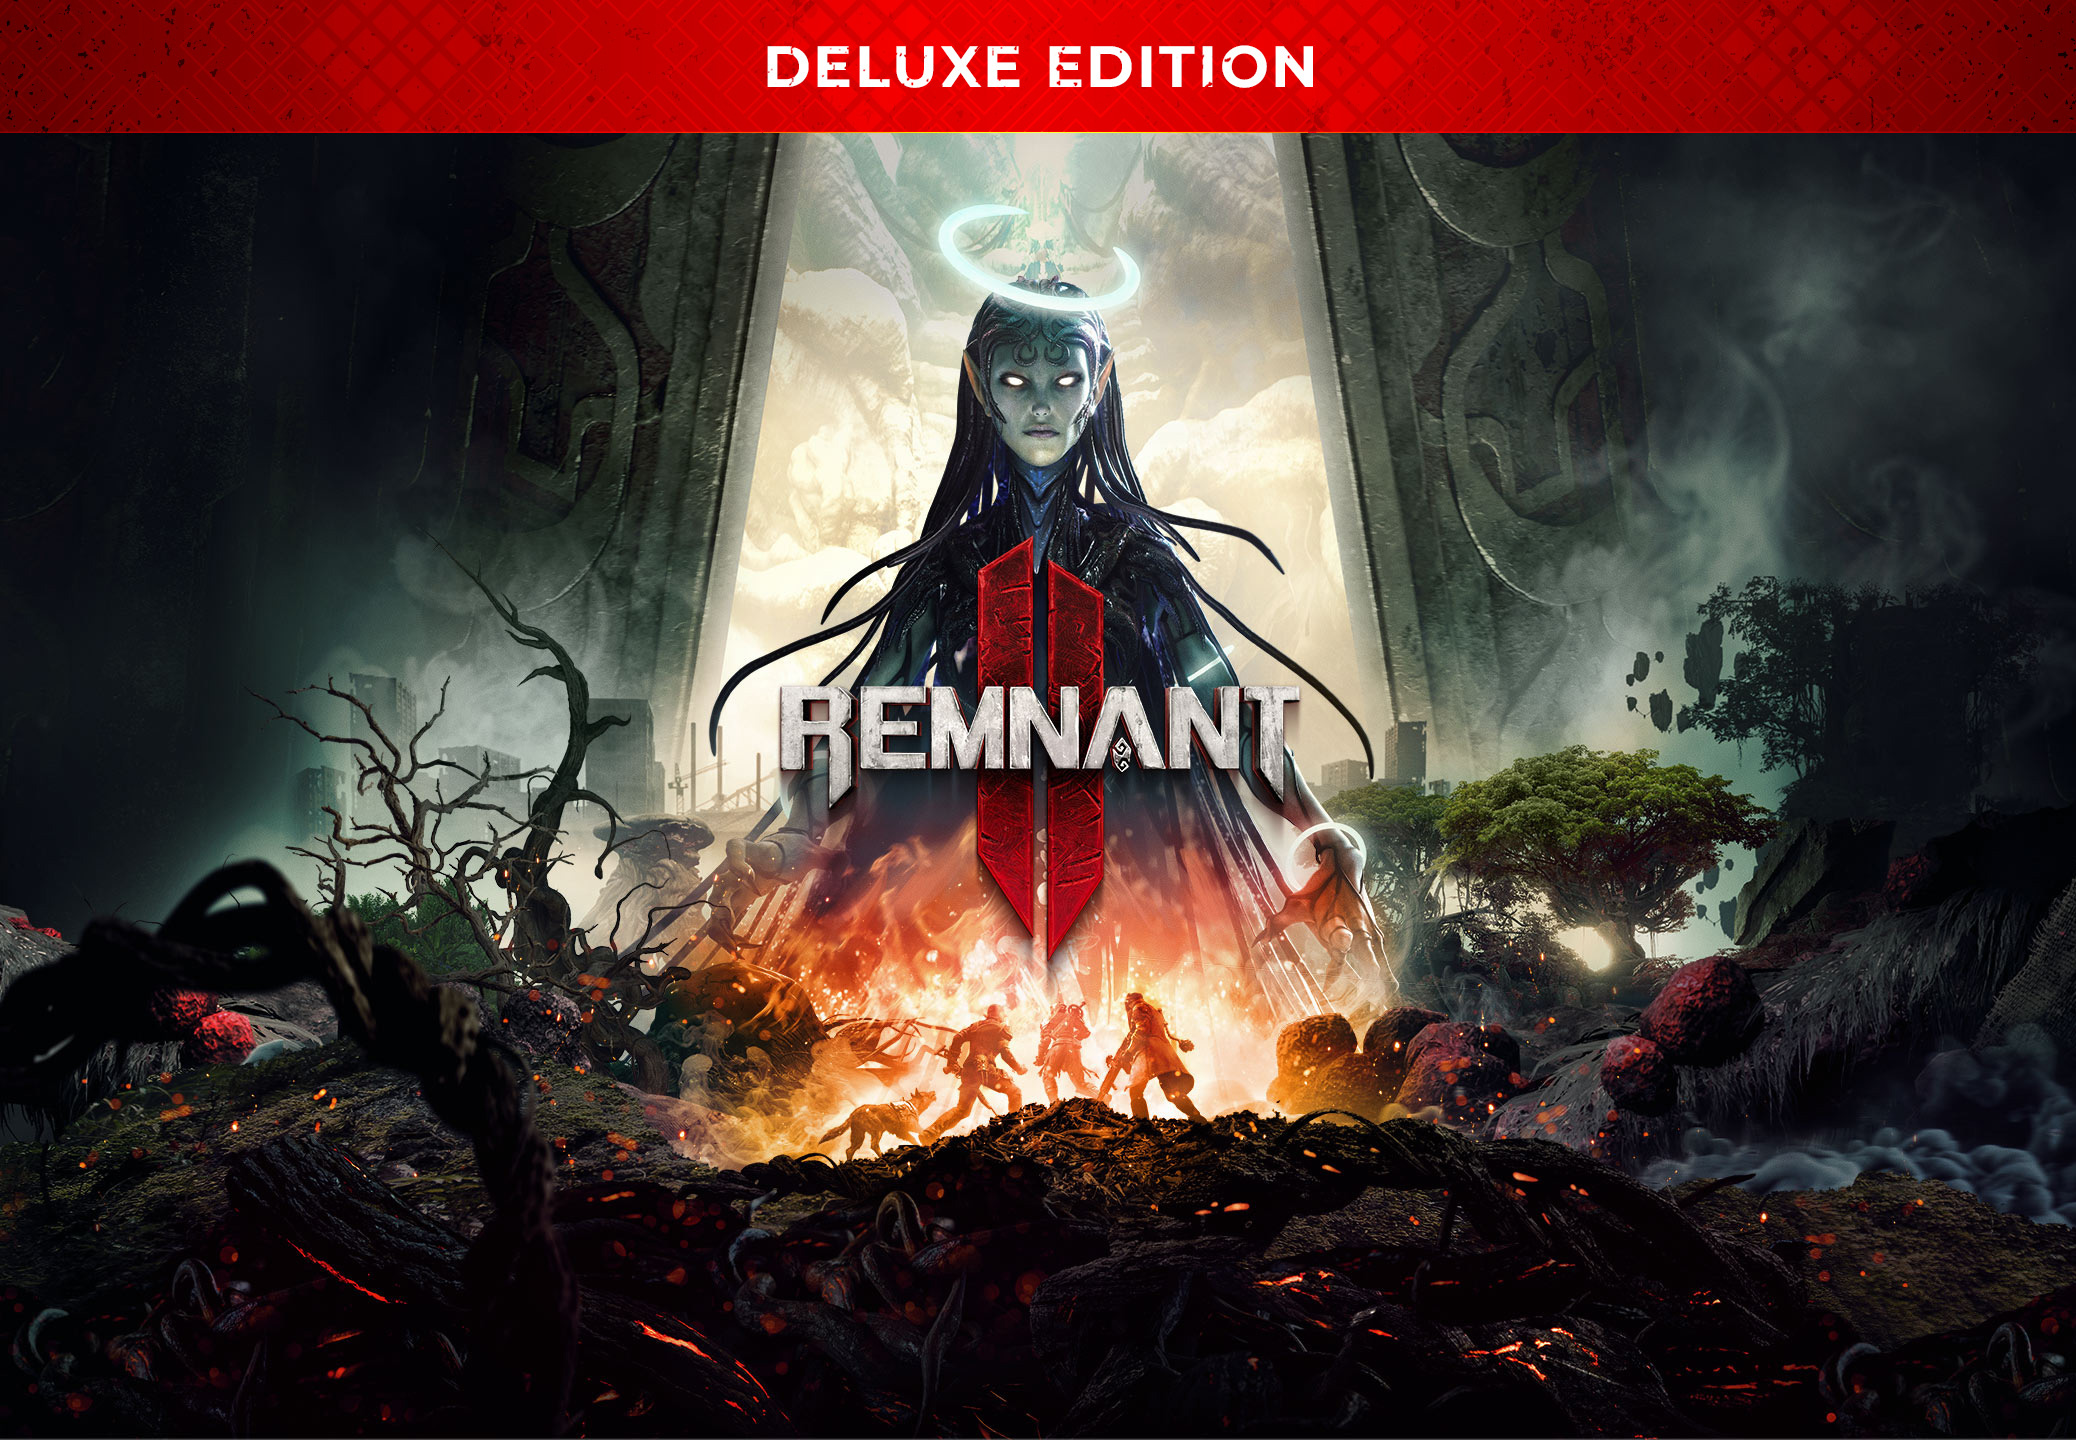 Remnant II Deluxe Edition Steam CD Key